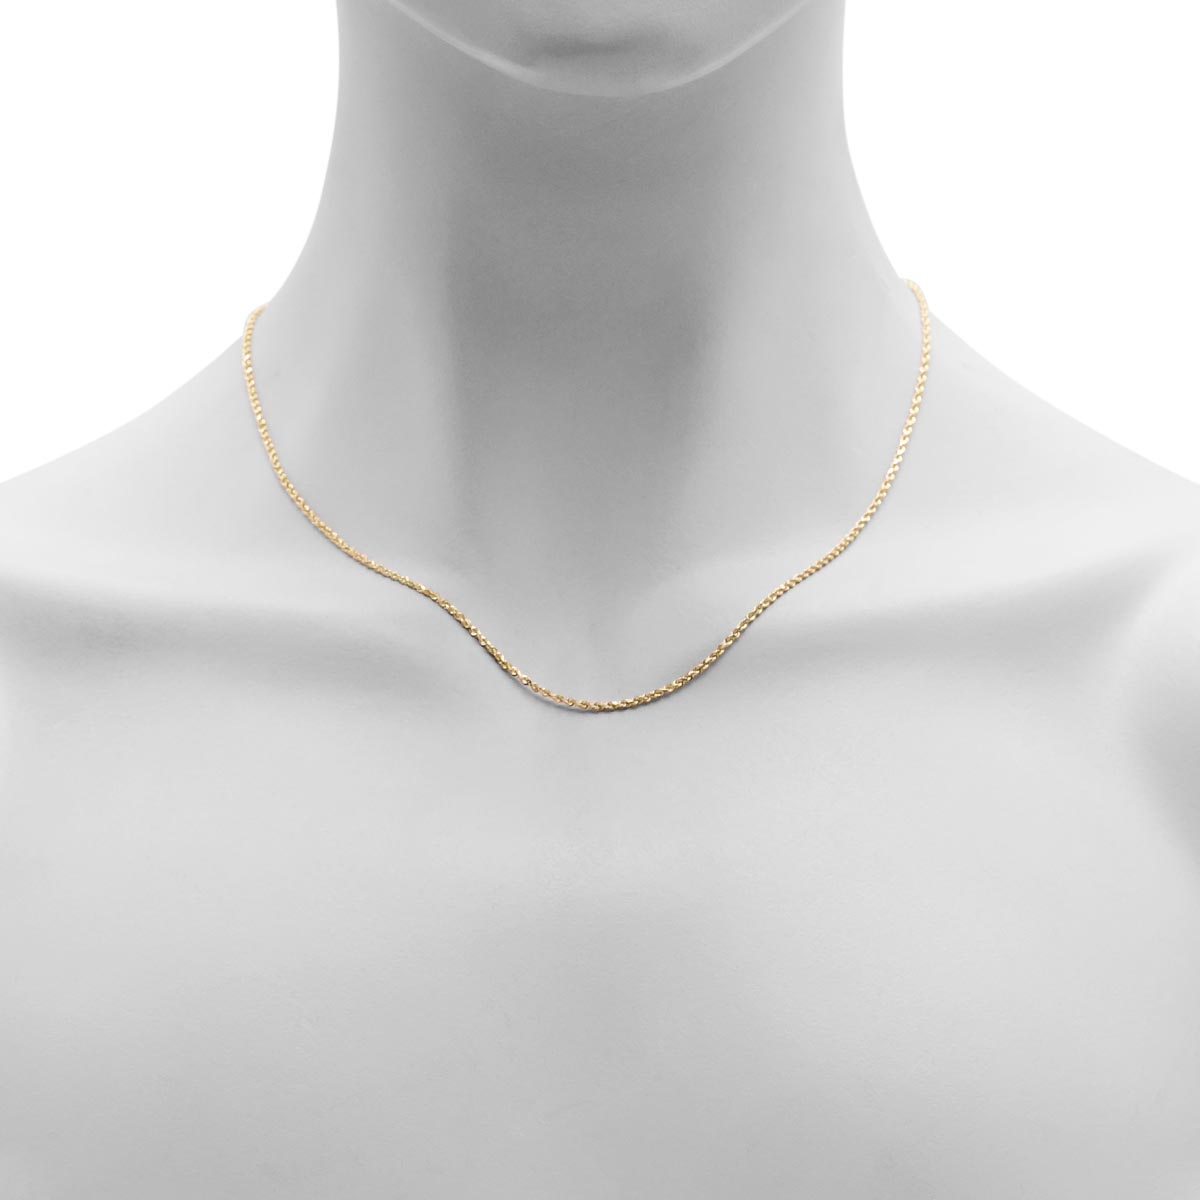 Diamond Cut Rope Chain in 14kt Yellow Gold  (18 inches and 1.5mm wide)